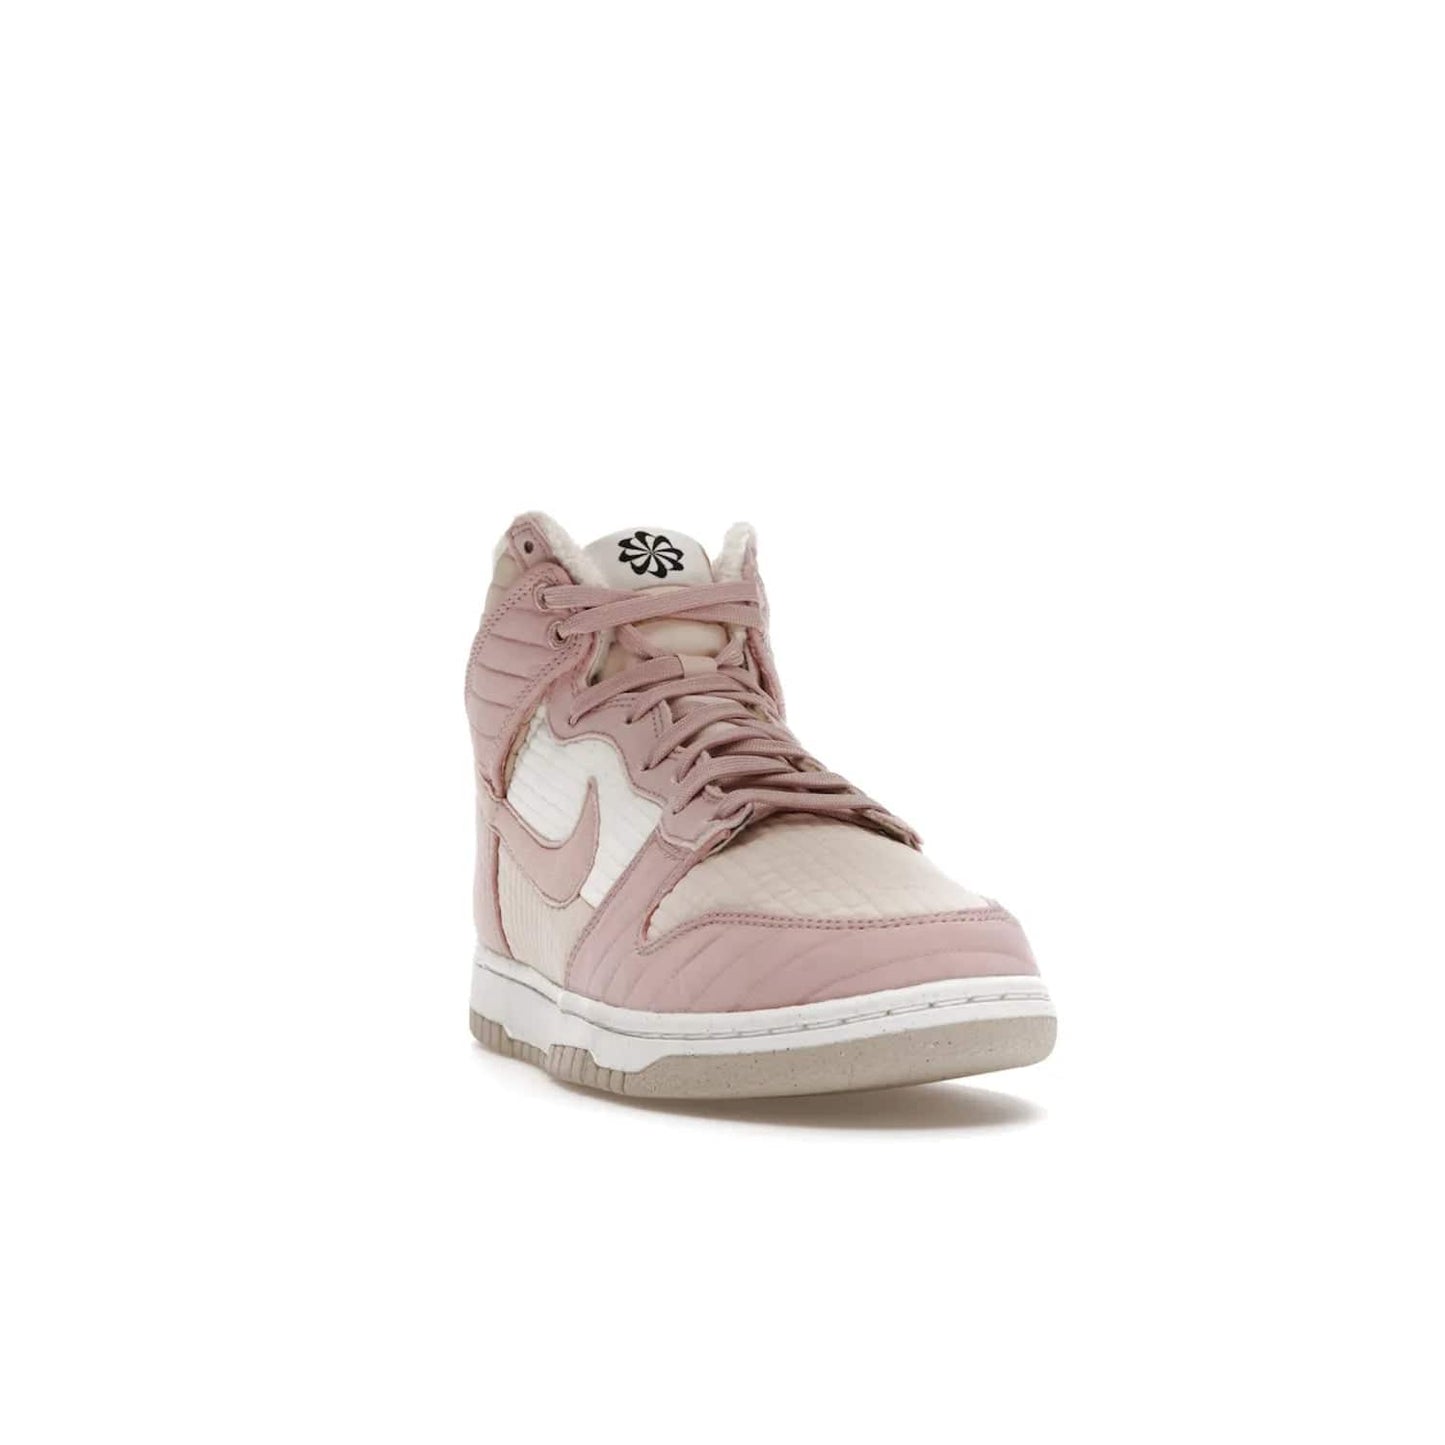 Nike Dunk High LX Next Nature Pink Oxford (Women's) - Image 8 - Only at www.BallersClubKickz.com - Cozy up in the Nike Dunk High LX Next Nature Pink Oxford for Women. Quilted upper, white midsole, soft fleece interior provide warmth and comfort for cold winter nights.